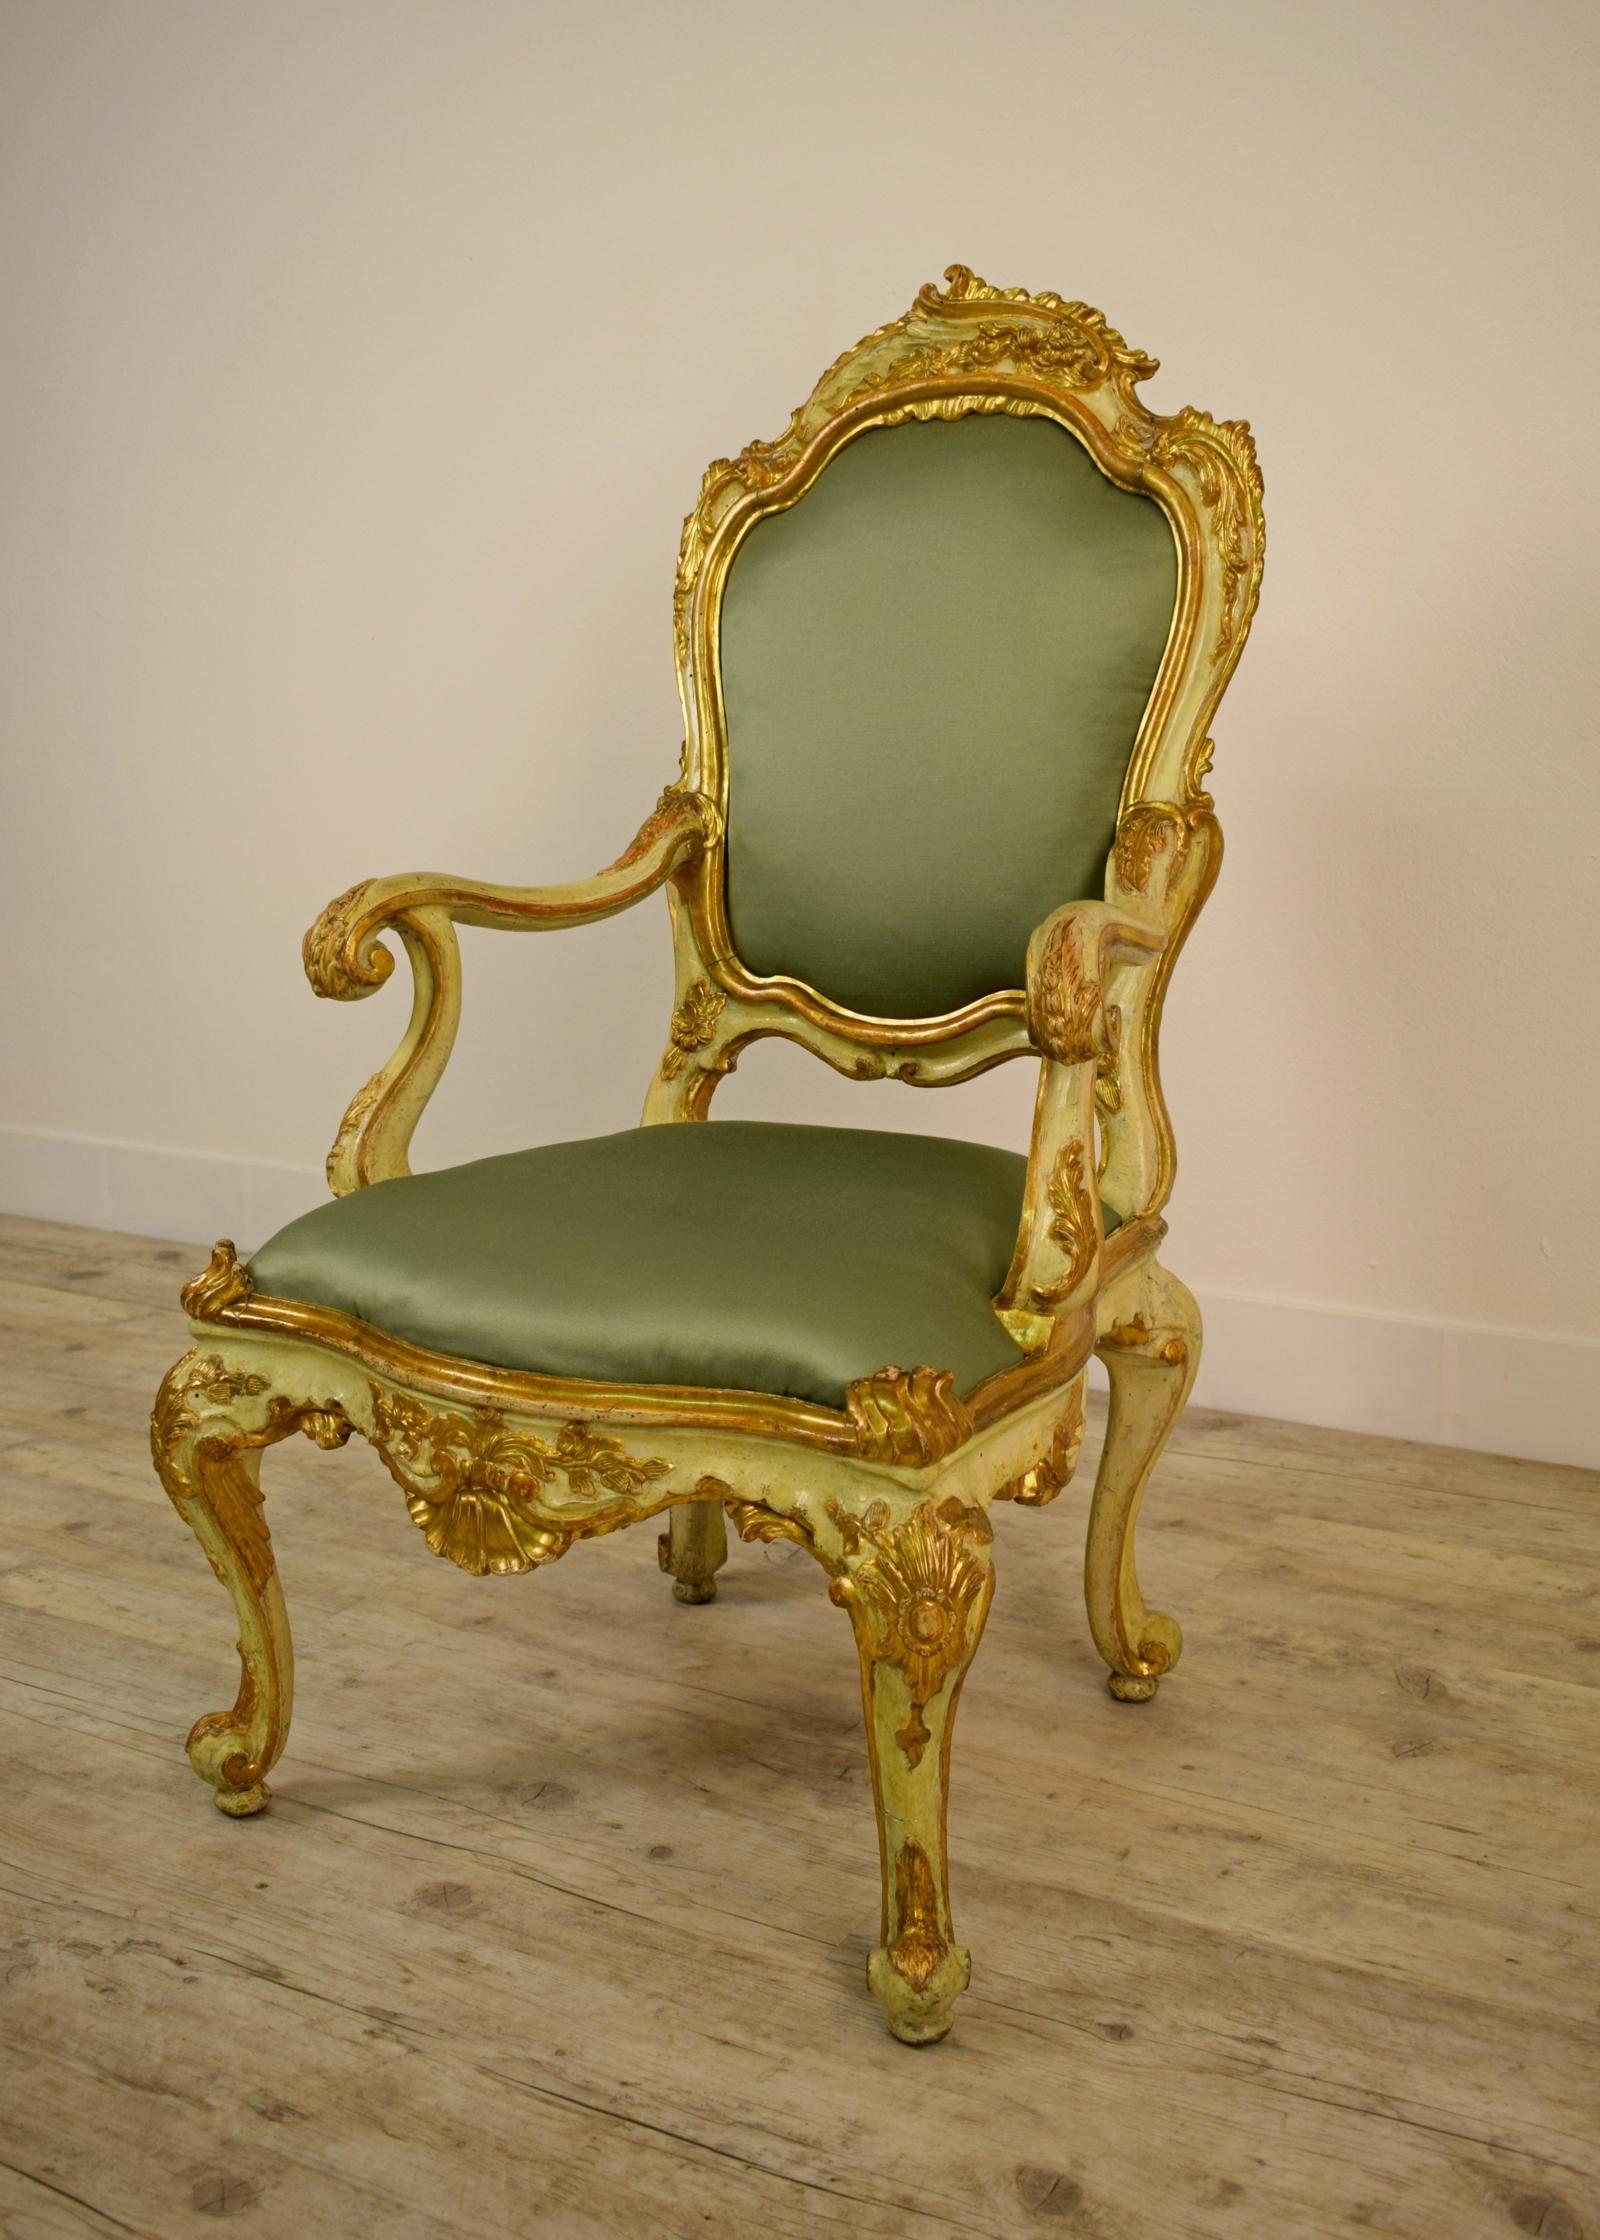 18th Century Venetian Lacquered and Gilded Wood Armchair (Italienisch)